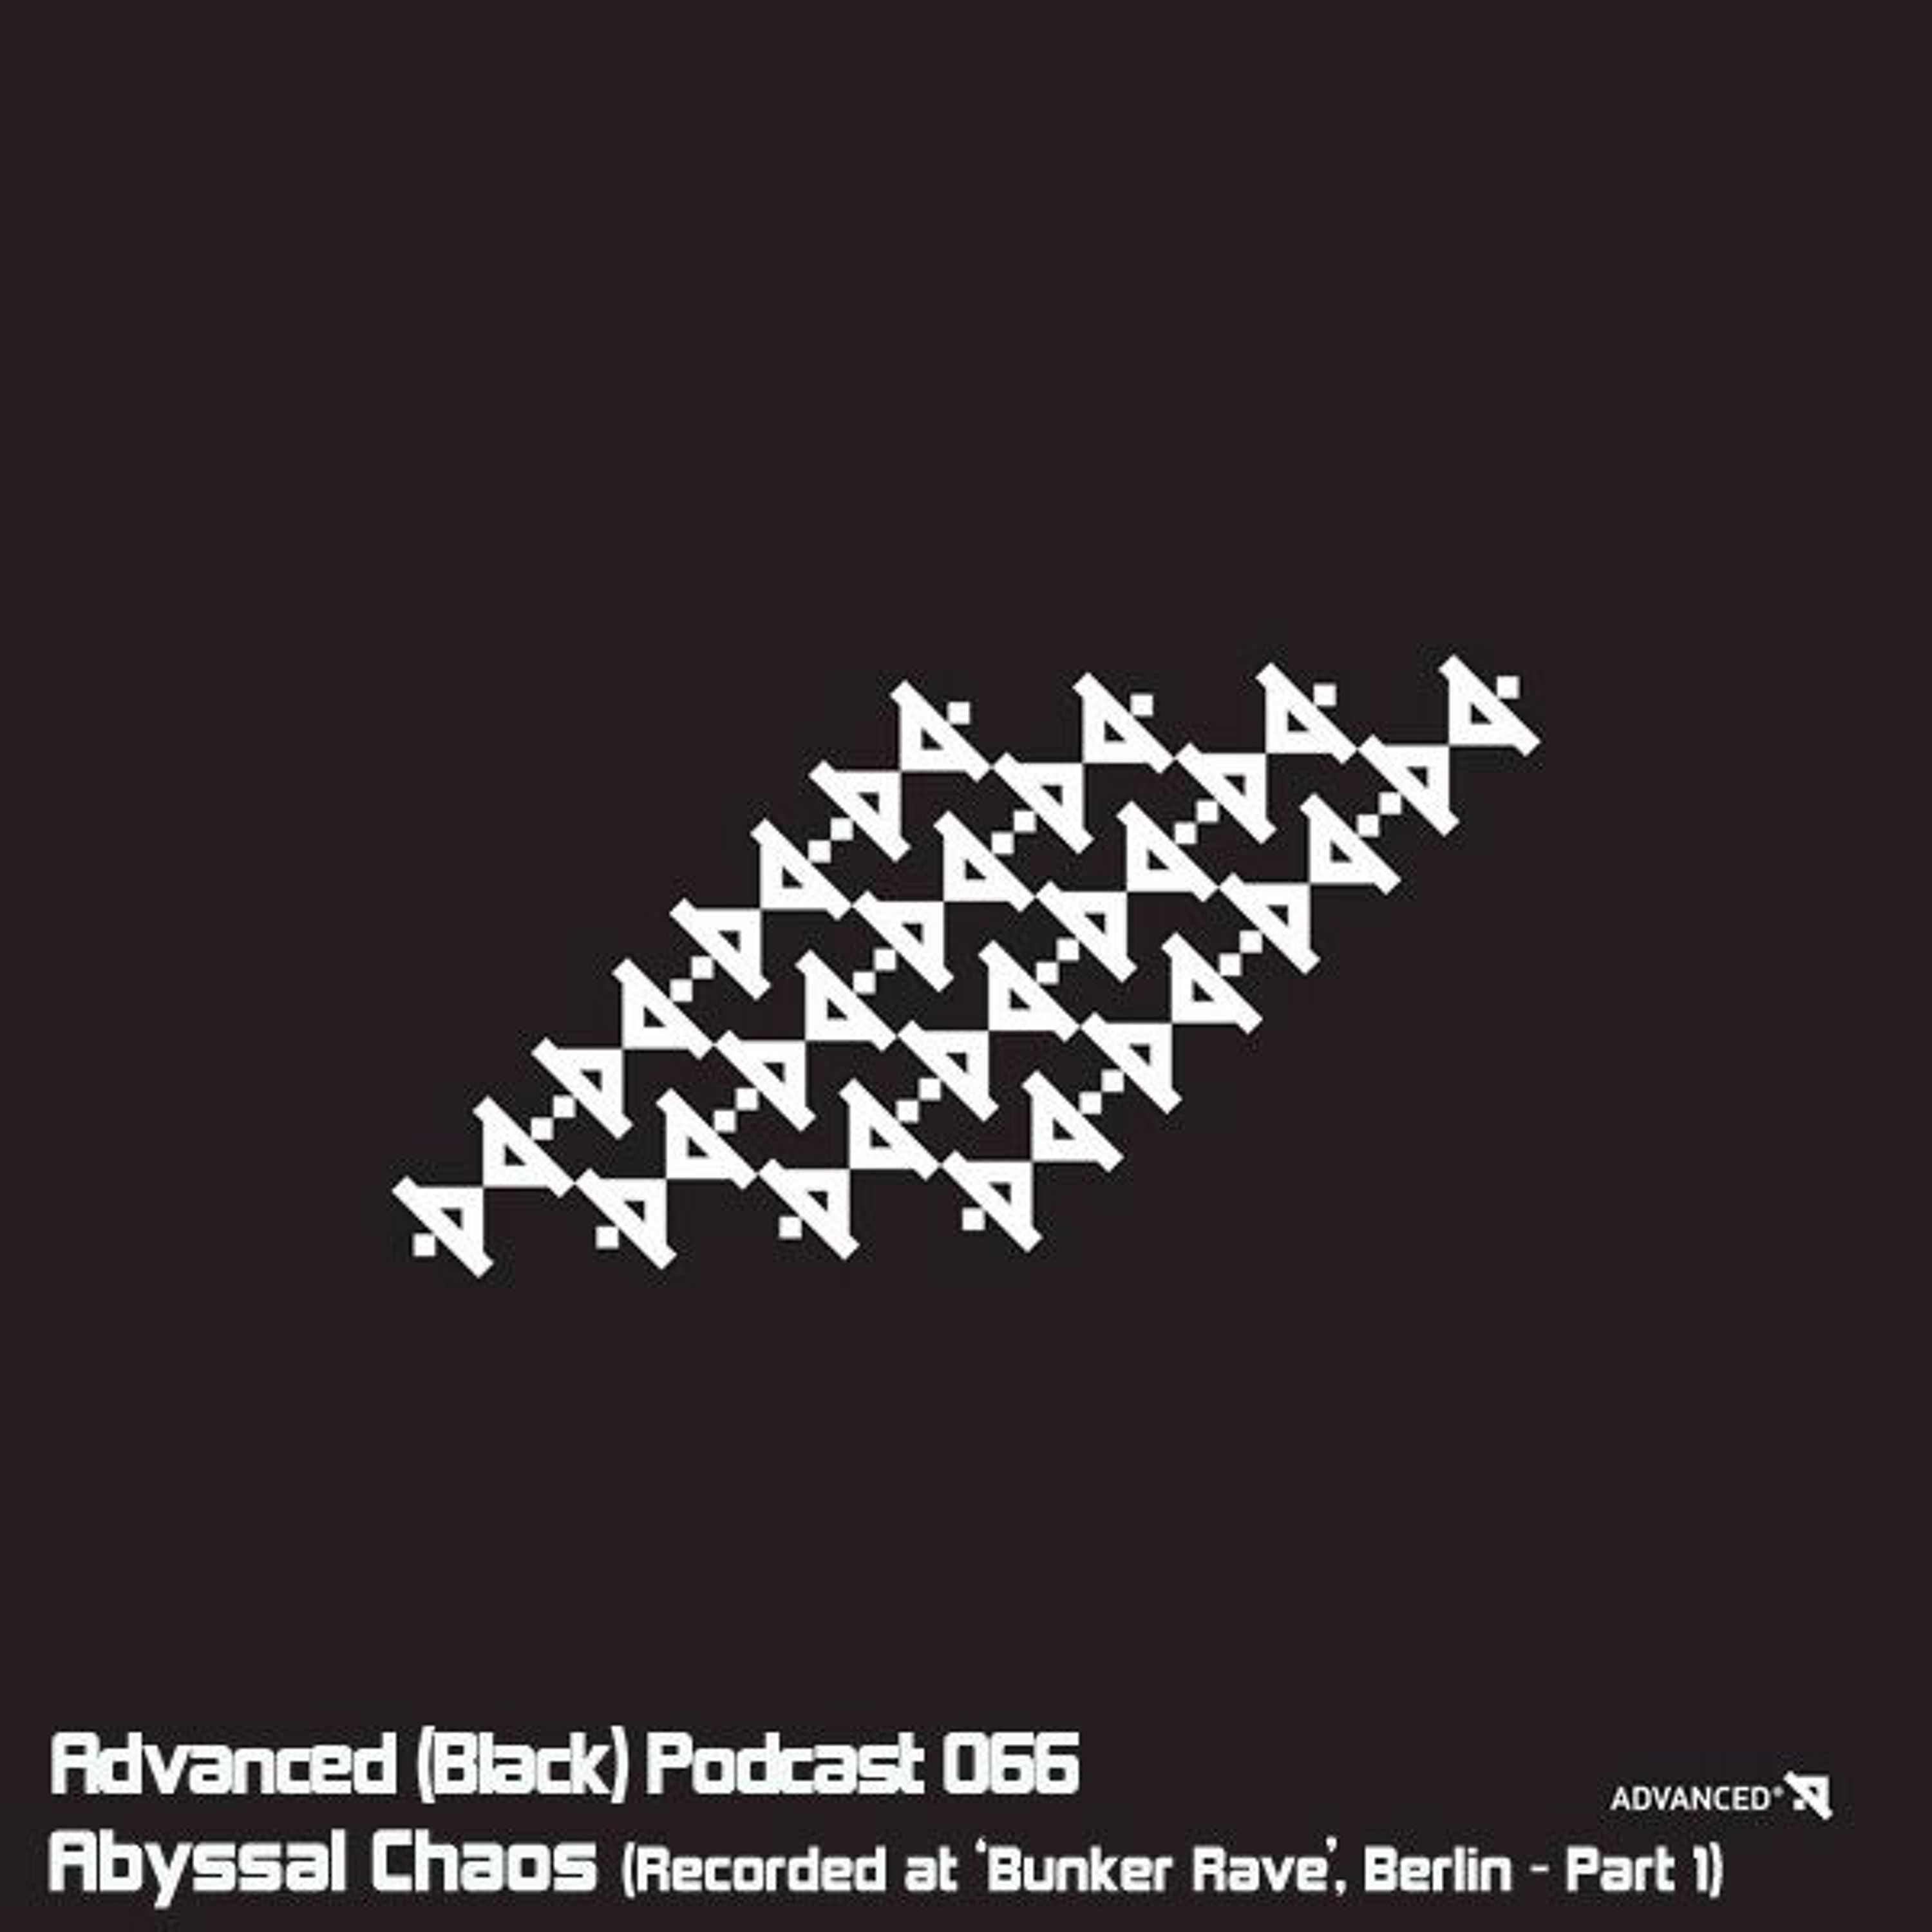 Advanced (Black) Podcast 066 with Abyssal Chaos (Recorded at Bunker Rave, Berlin - 16 HOURS [1/3])